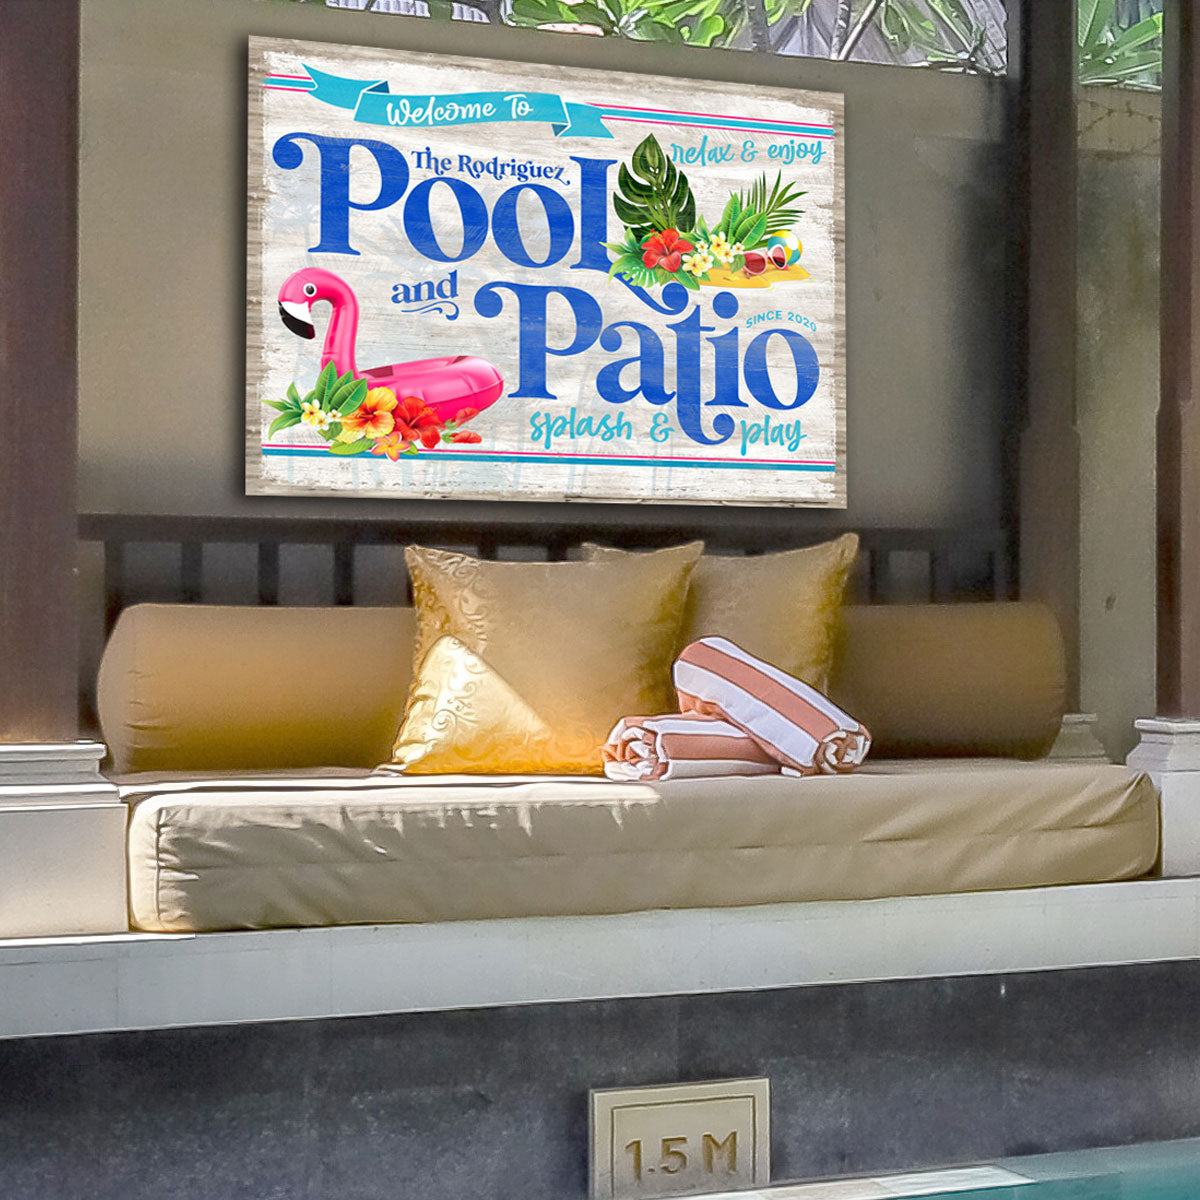 Welcome to The [Family name] Pool and Patio. Relax and Enjoy Splash and Play